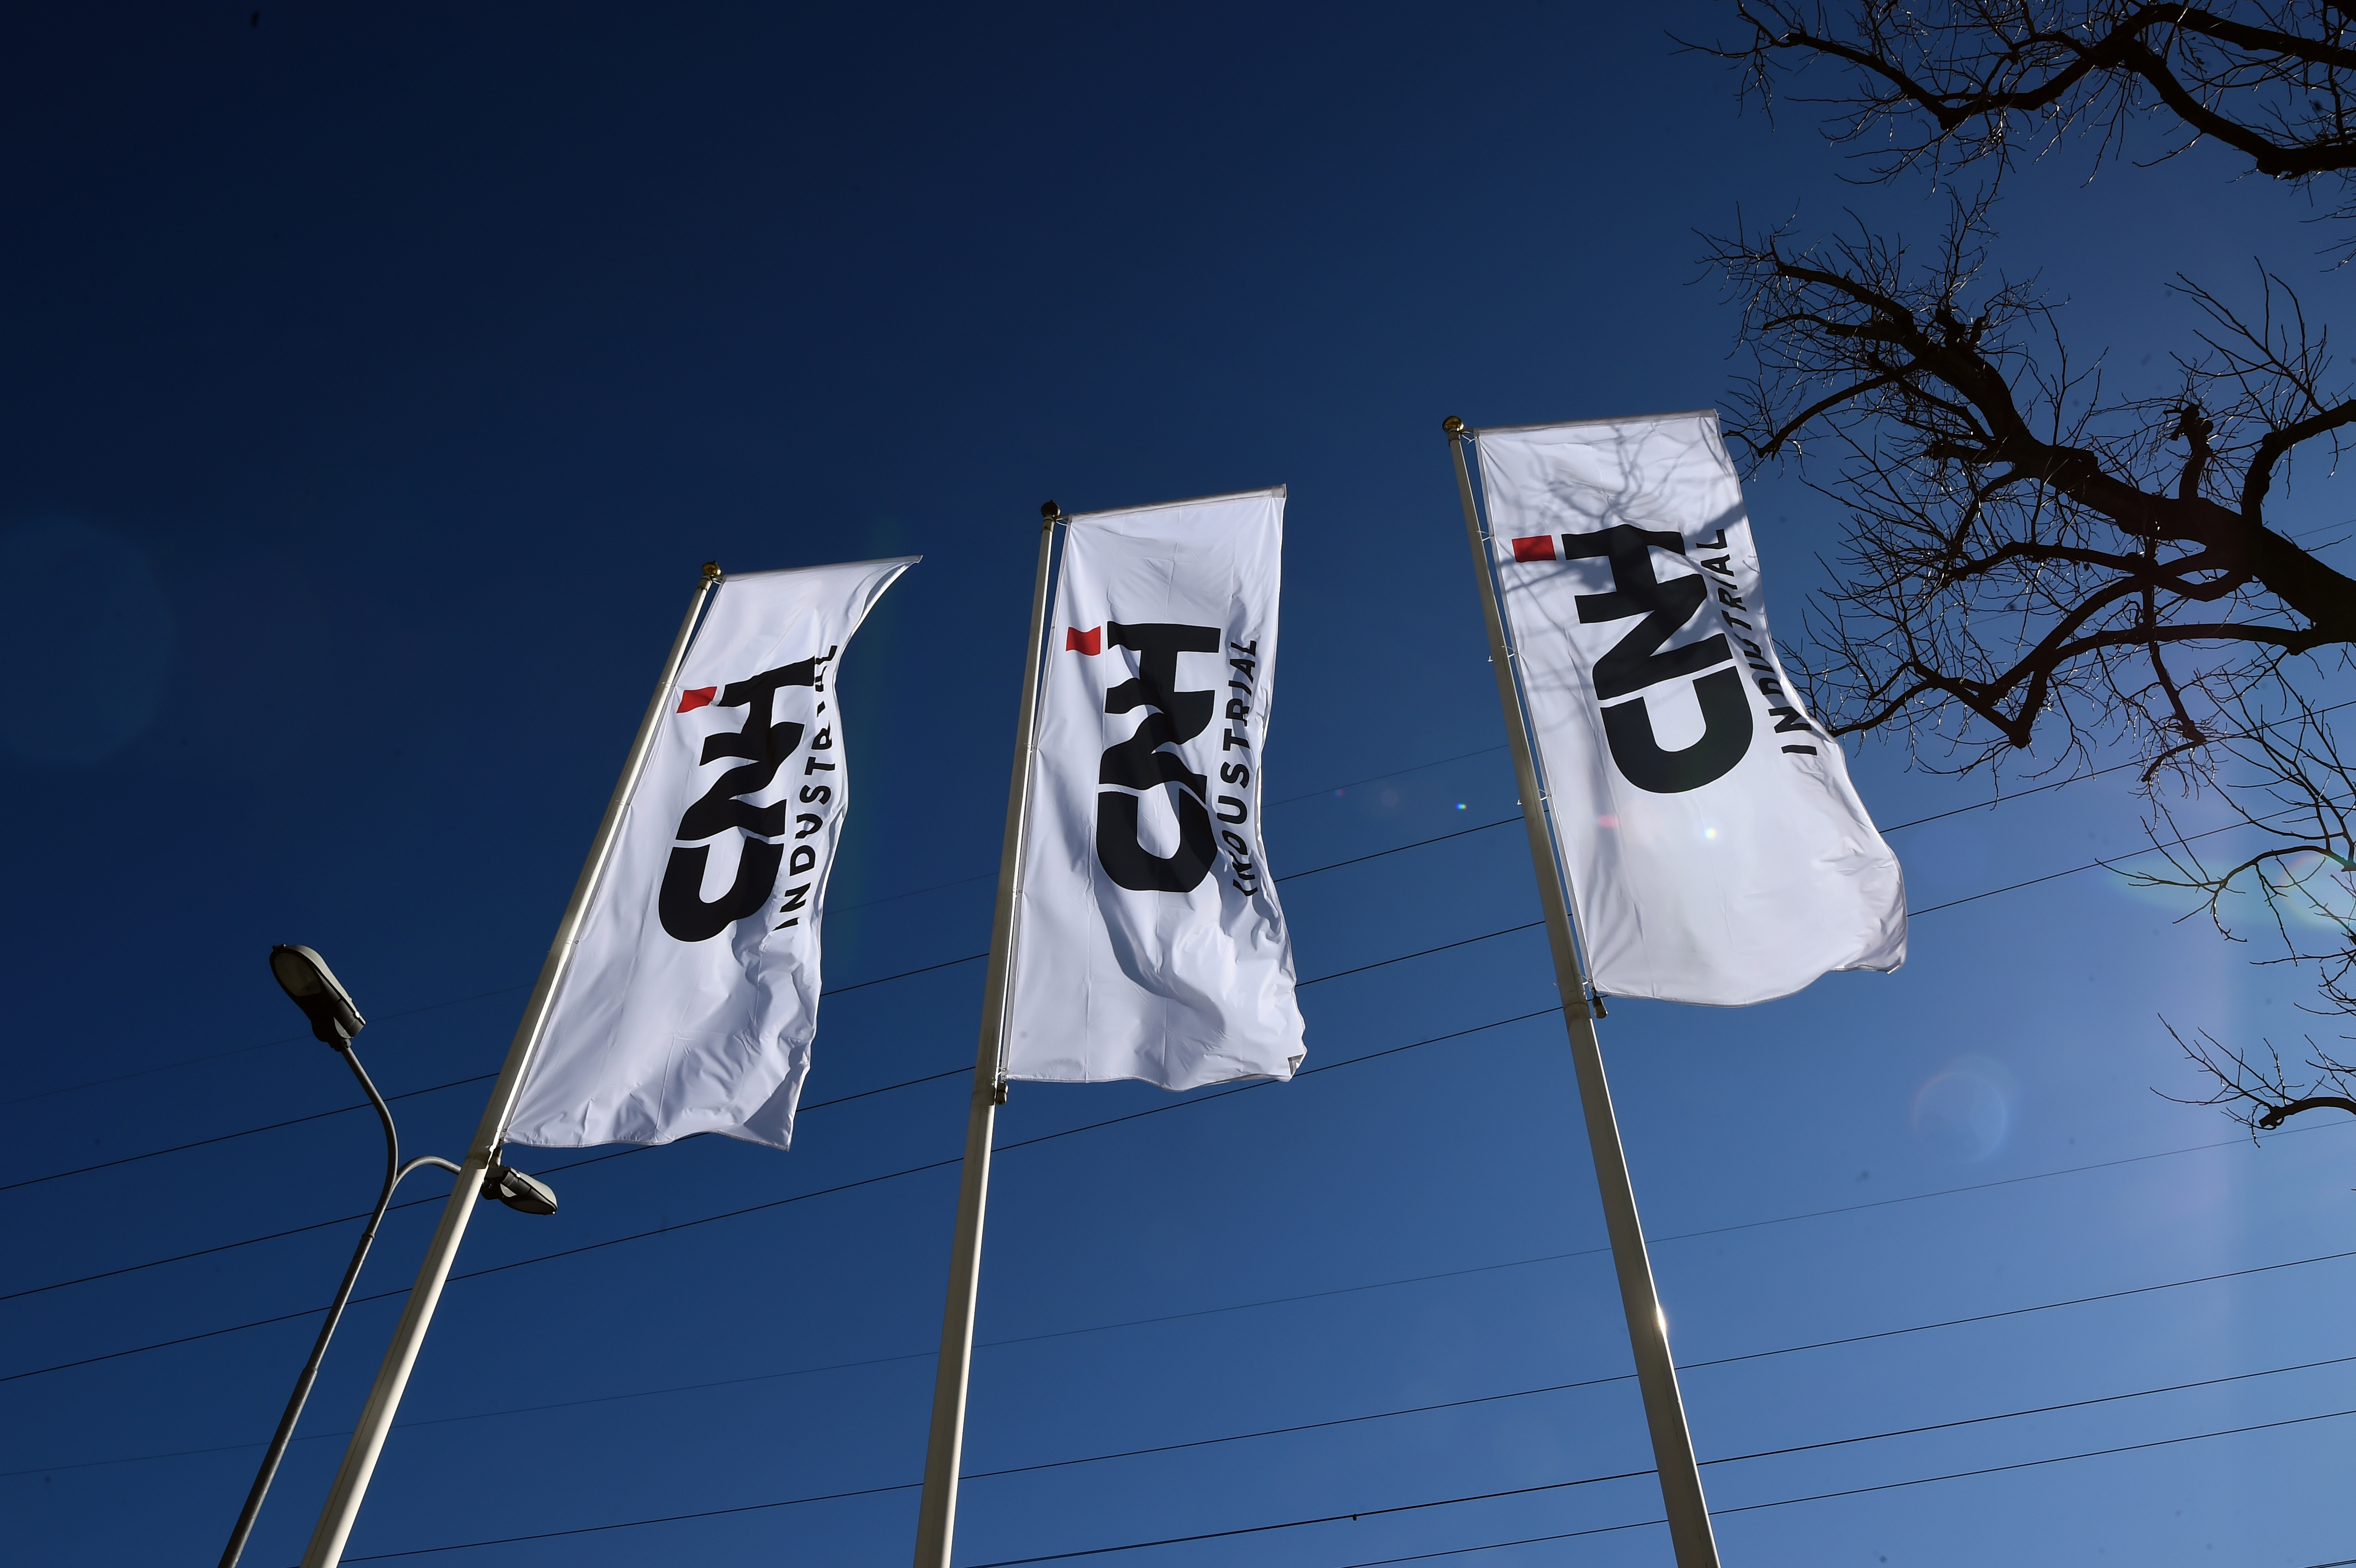 The truck and tractor maker CNH Industrial NV releases Q4 and FY results